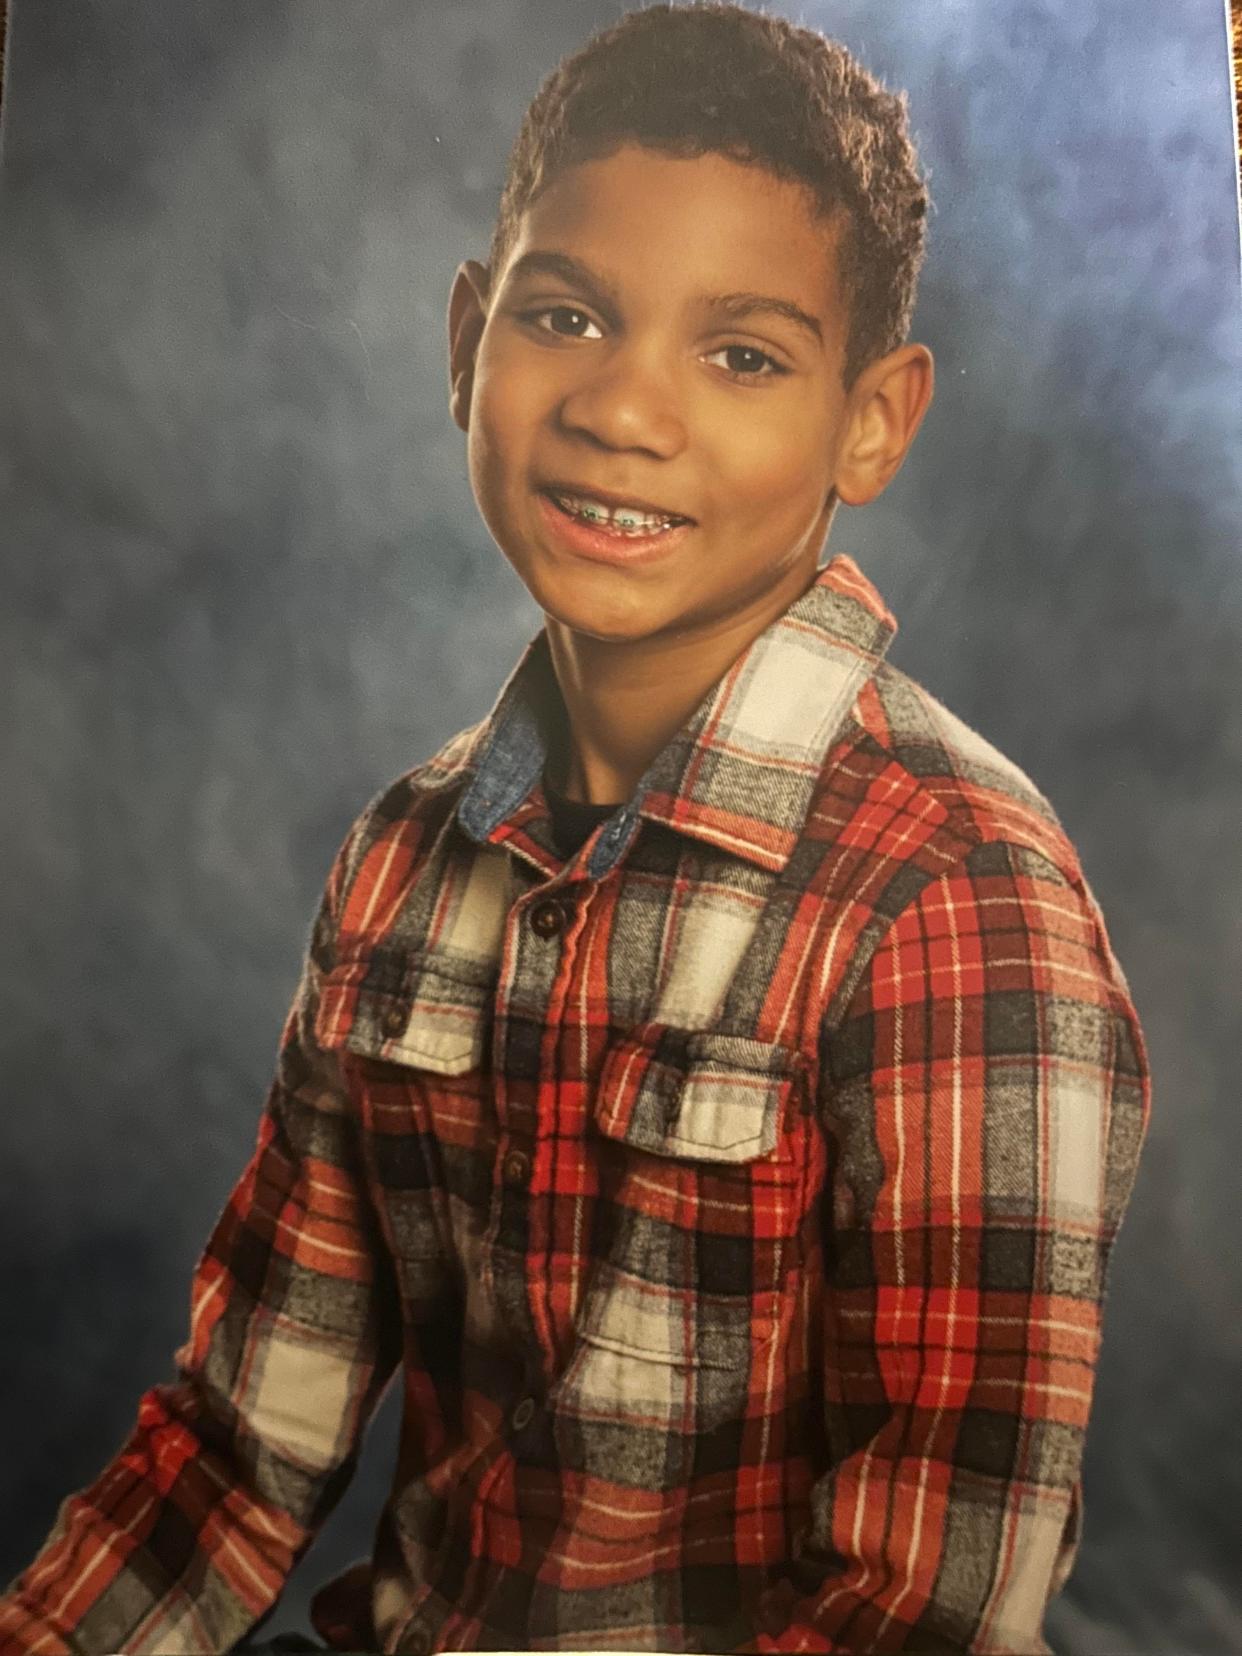 A photo of Aiden James-Harrison Smith, who died over the weekend after falling through ice near his home.